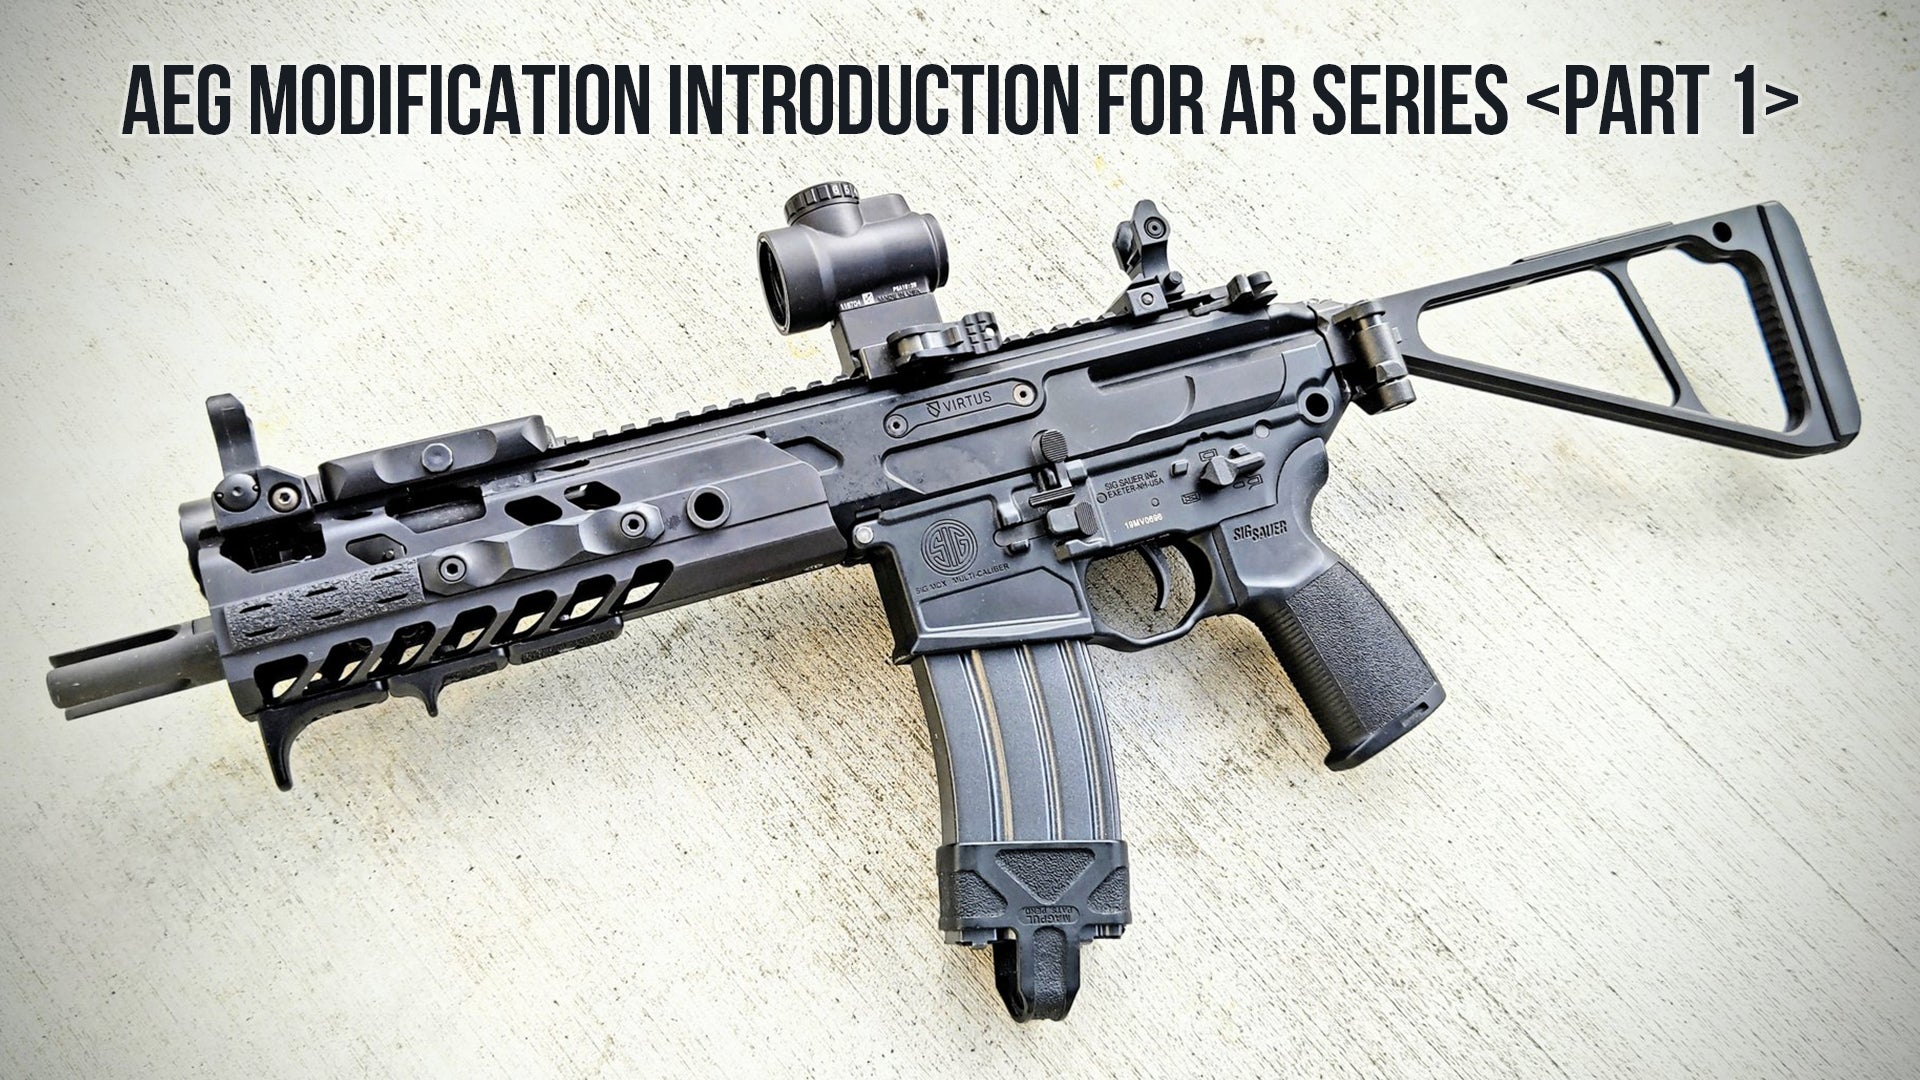 AEG Modification Introduction For AR Series <Part 1>